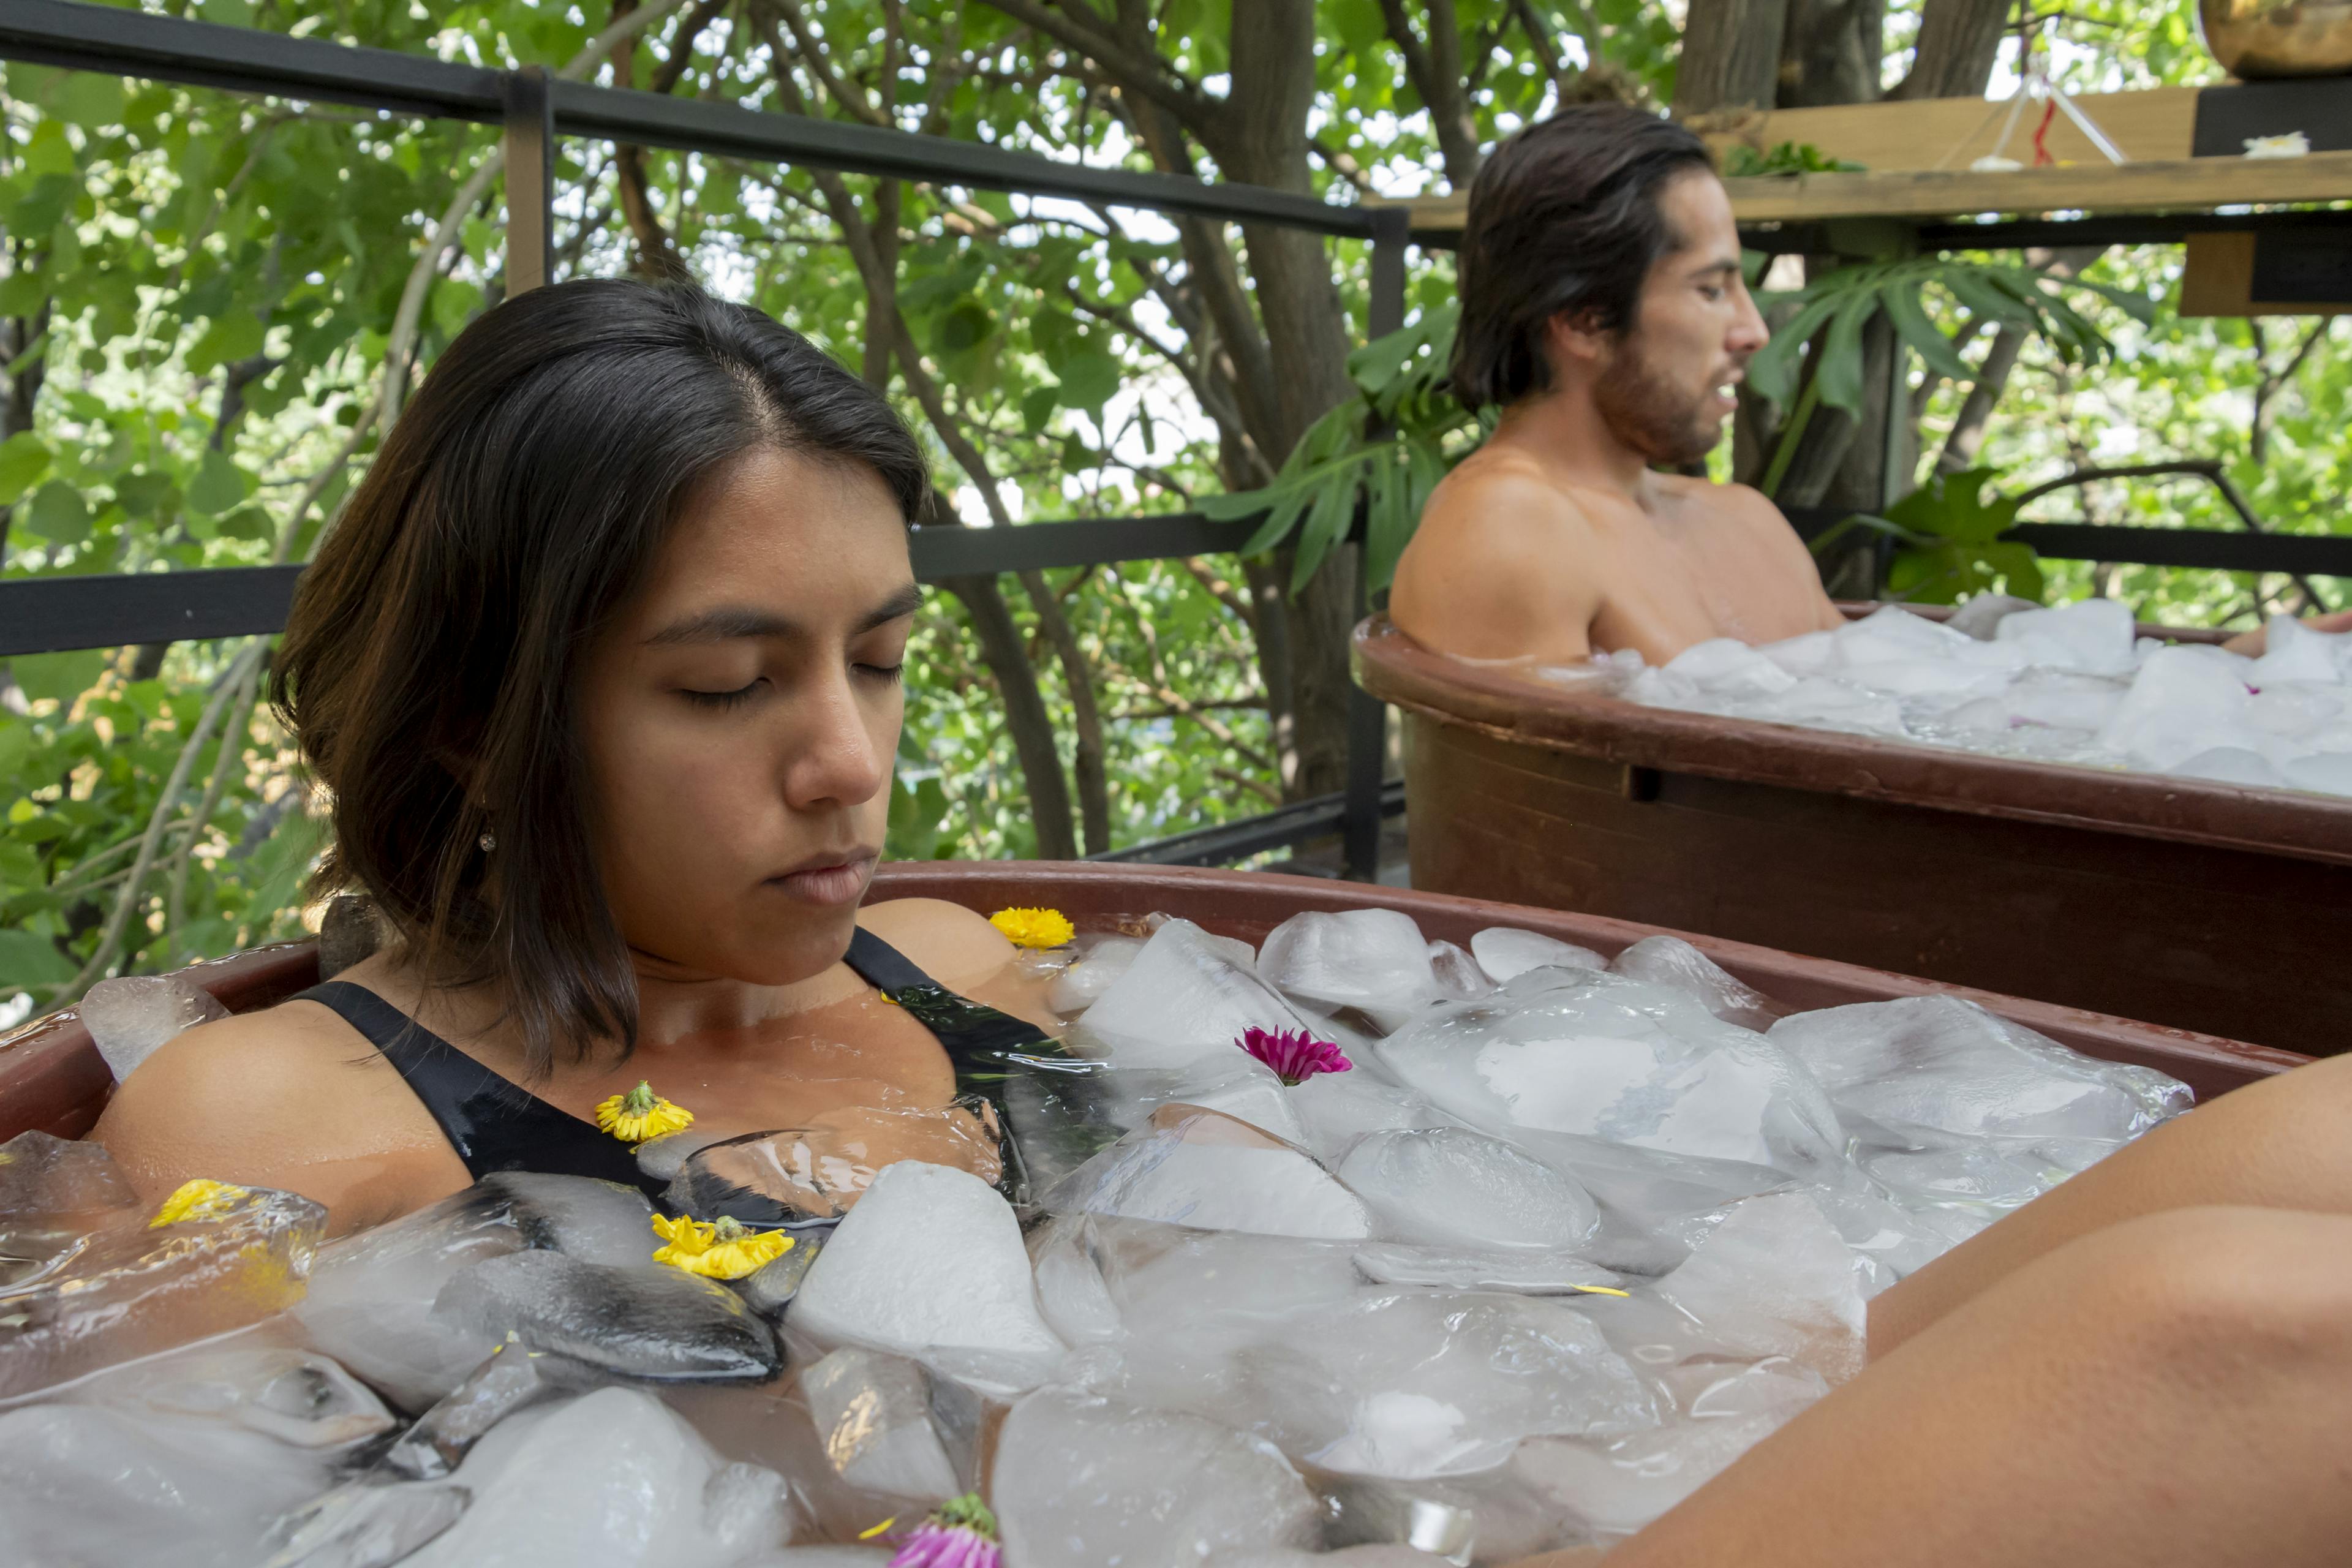 A man and a woman are taking an ice bath in a tub on the outdoor terrace